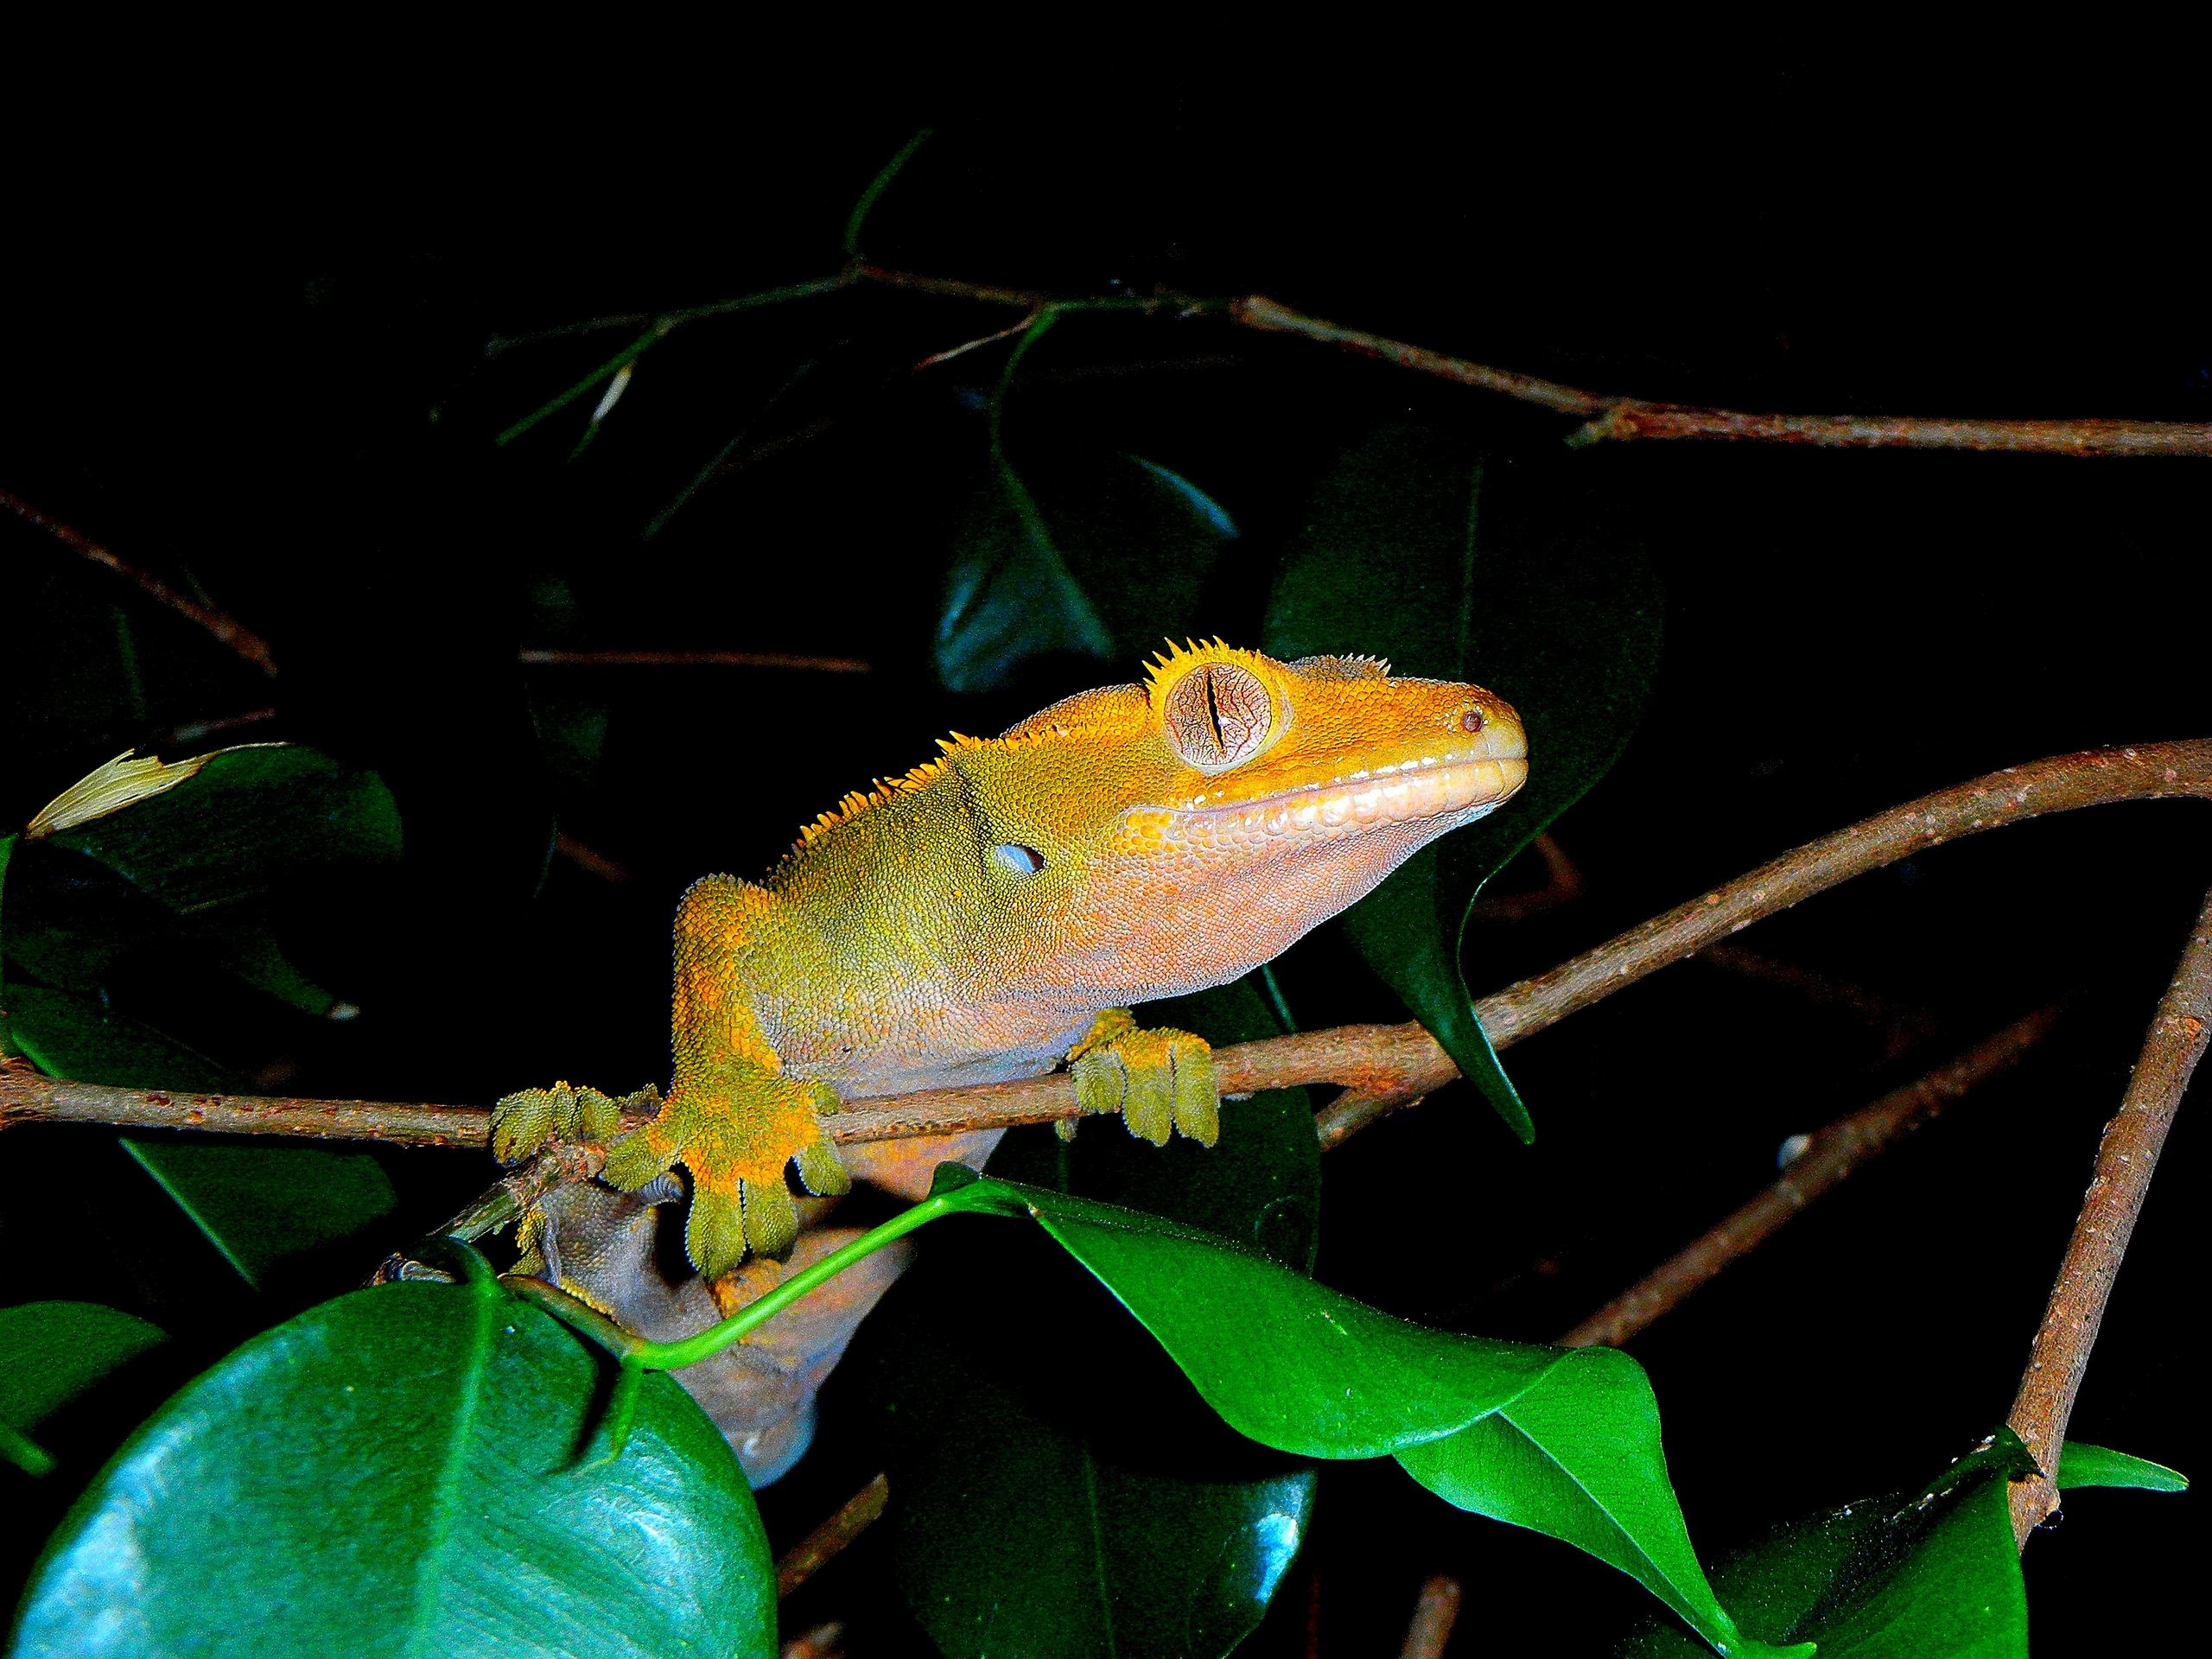 2560x1920 Reptiles images Female Crested Gecko Close-Up Photo HD wallpaper and  background photos